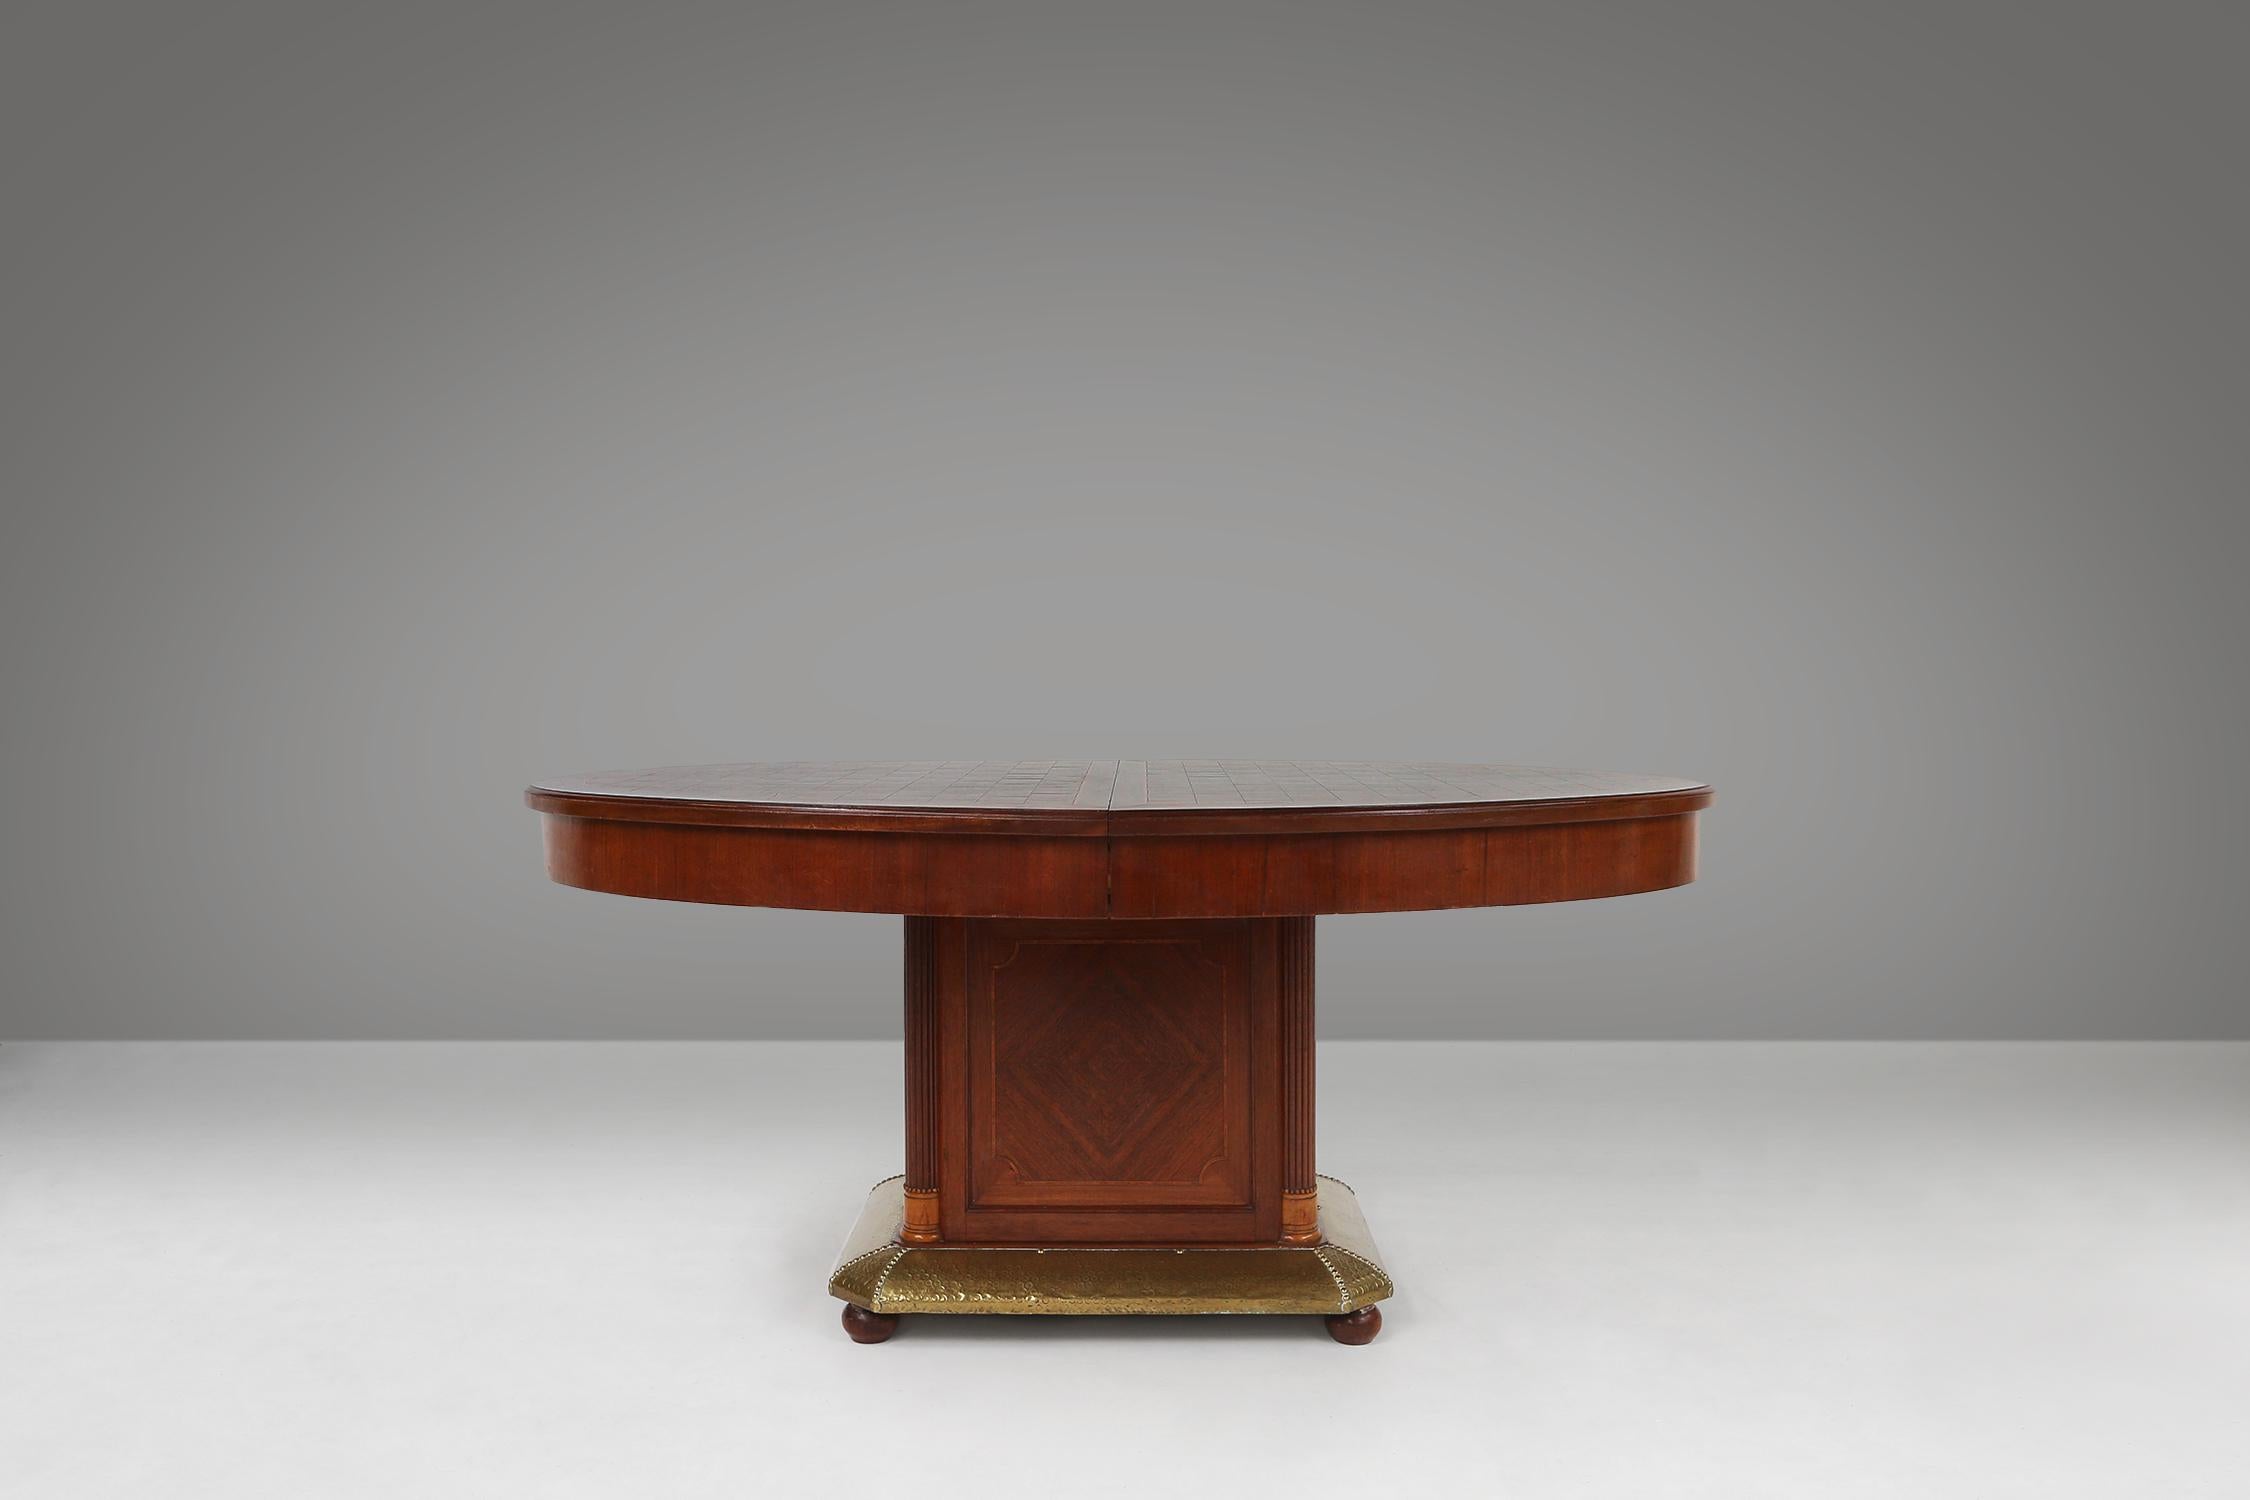 This Art Deco dining table was made by De Coene in Belgium in 1930. This table is made of wood with inlaid wood and has a brass base. The table is oval in shape with a chessboard pattern on the top. The base is square with a geometric design. The